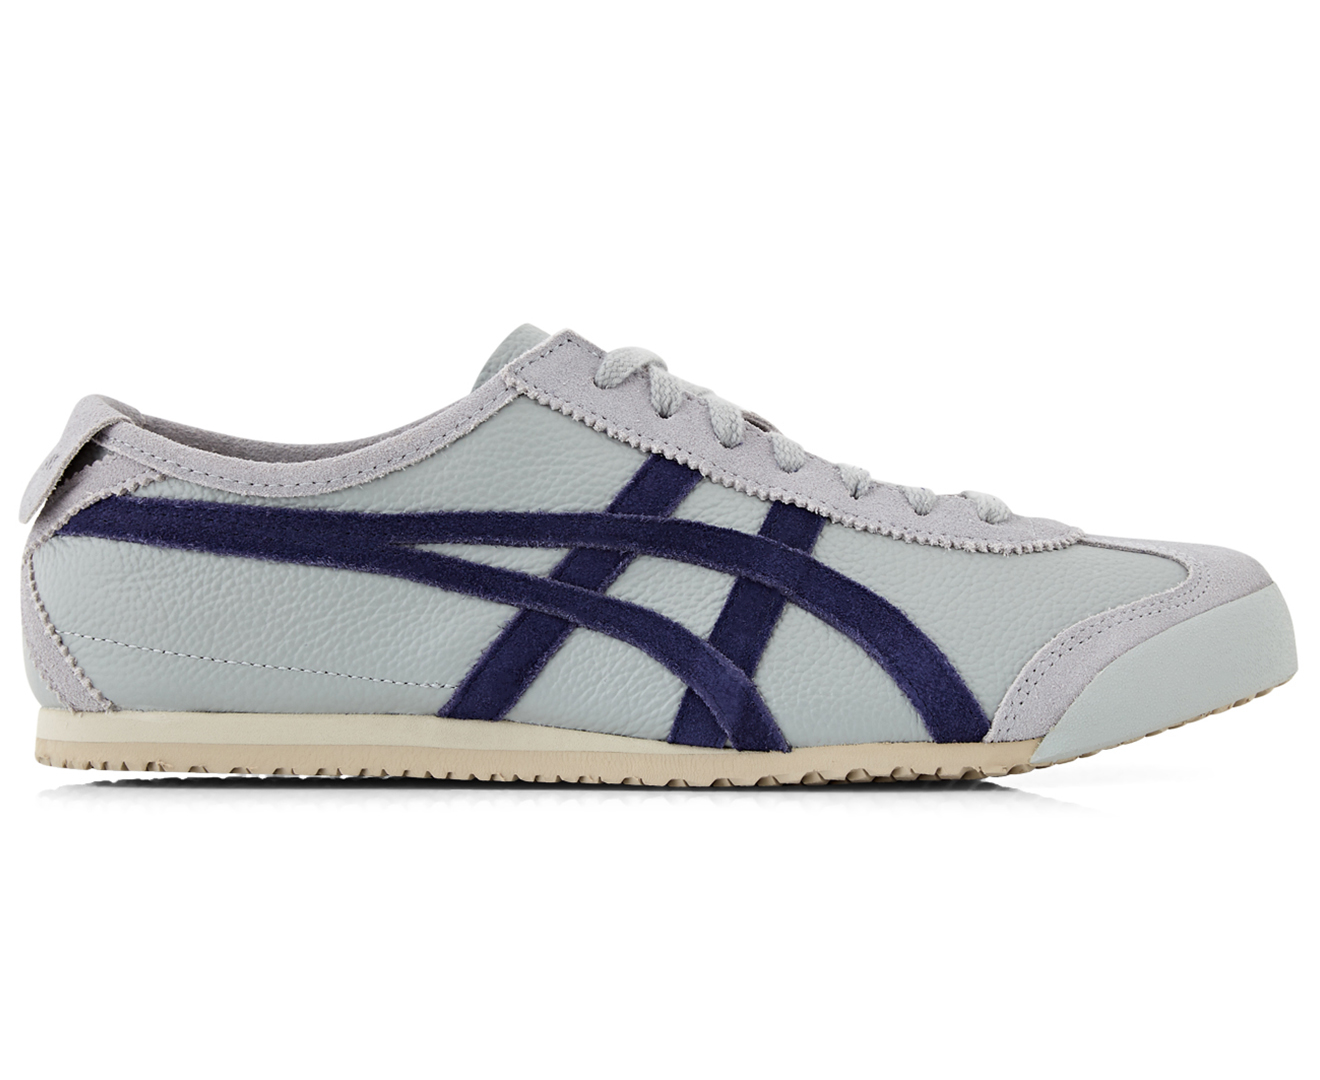 Onitsuka Tiger Men's Mexico 66 Vintage Shoe - Mid Grey/Peacoat | Catch ...